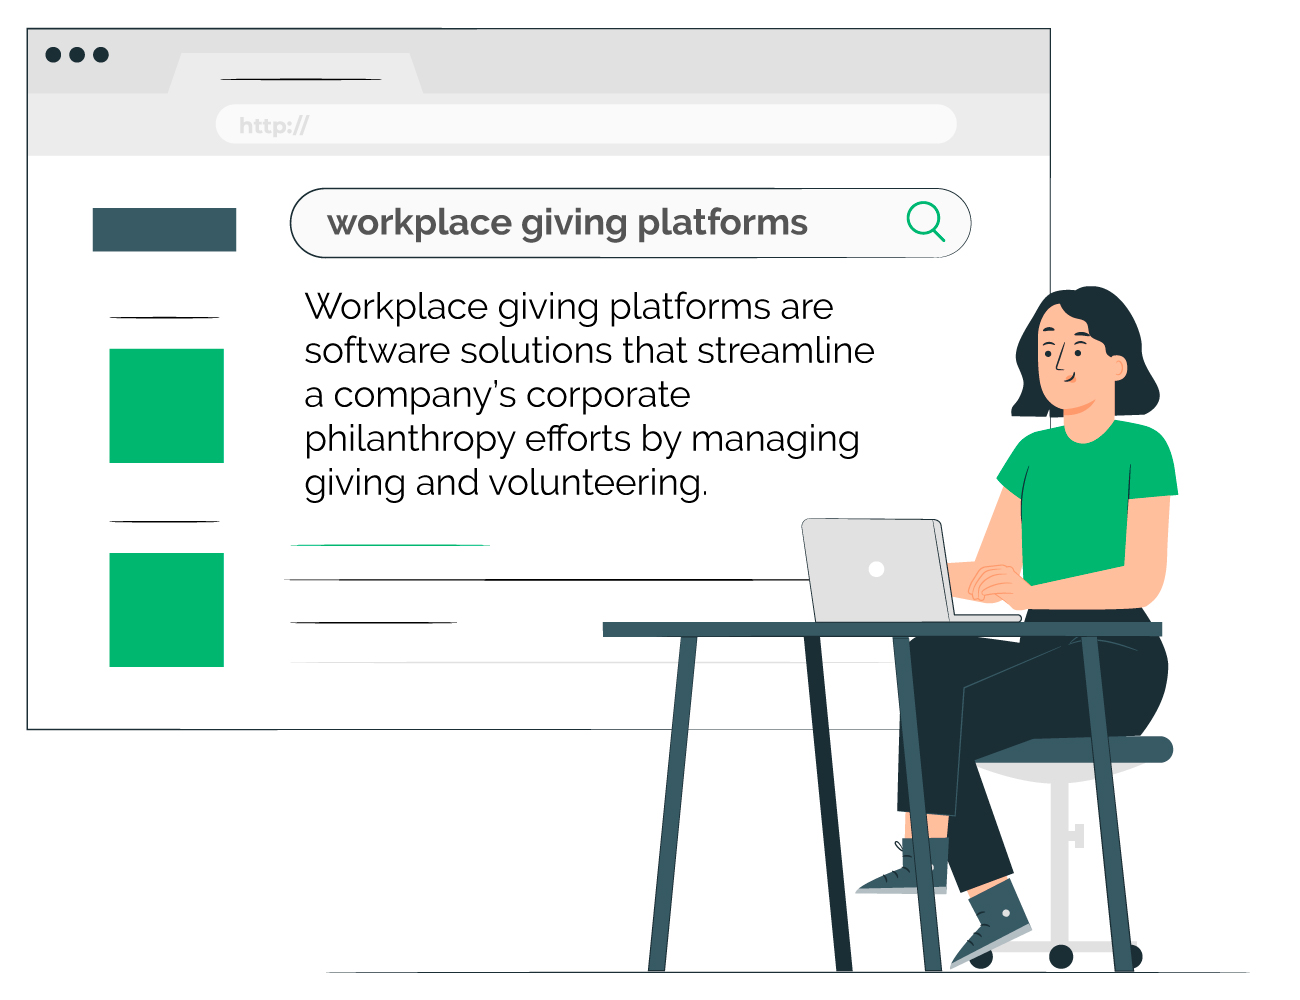 This image shows the definition of workplace giving platforms, which is written out in the text below.